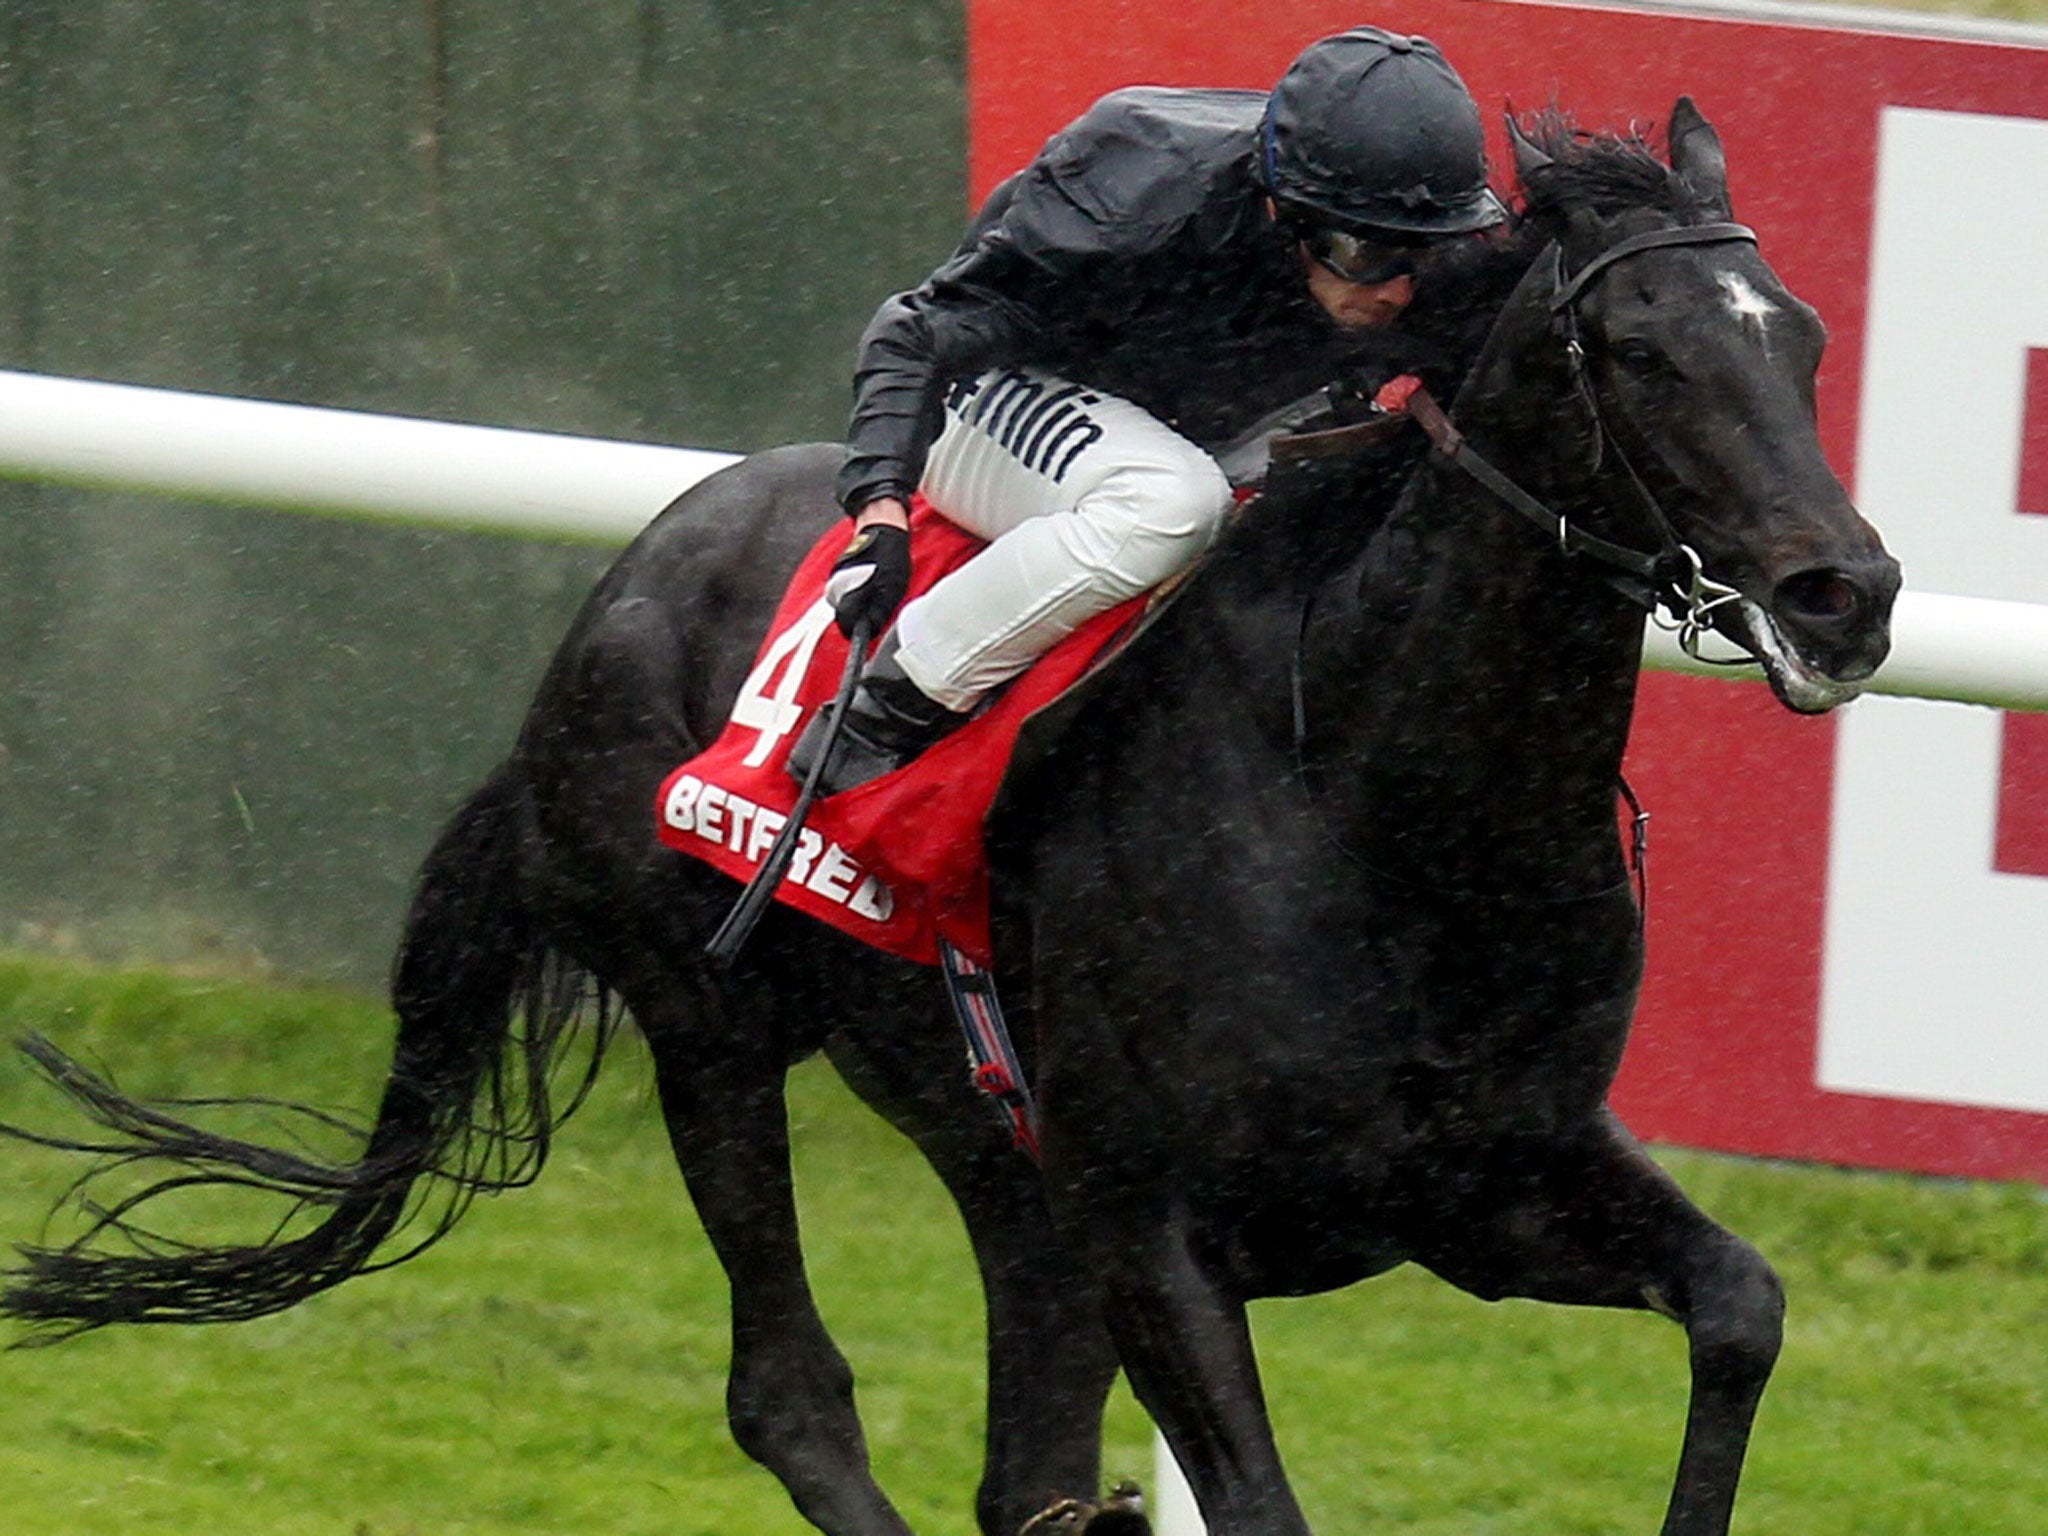 Easy ride: Nevis sees off limited opposition to win the Derby Trial at Lingfield